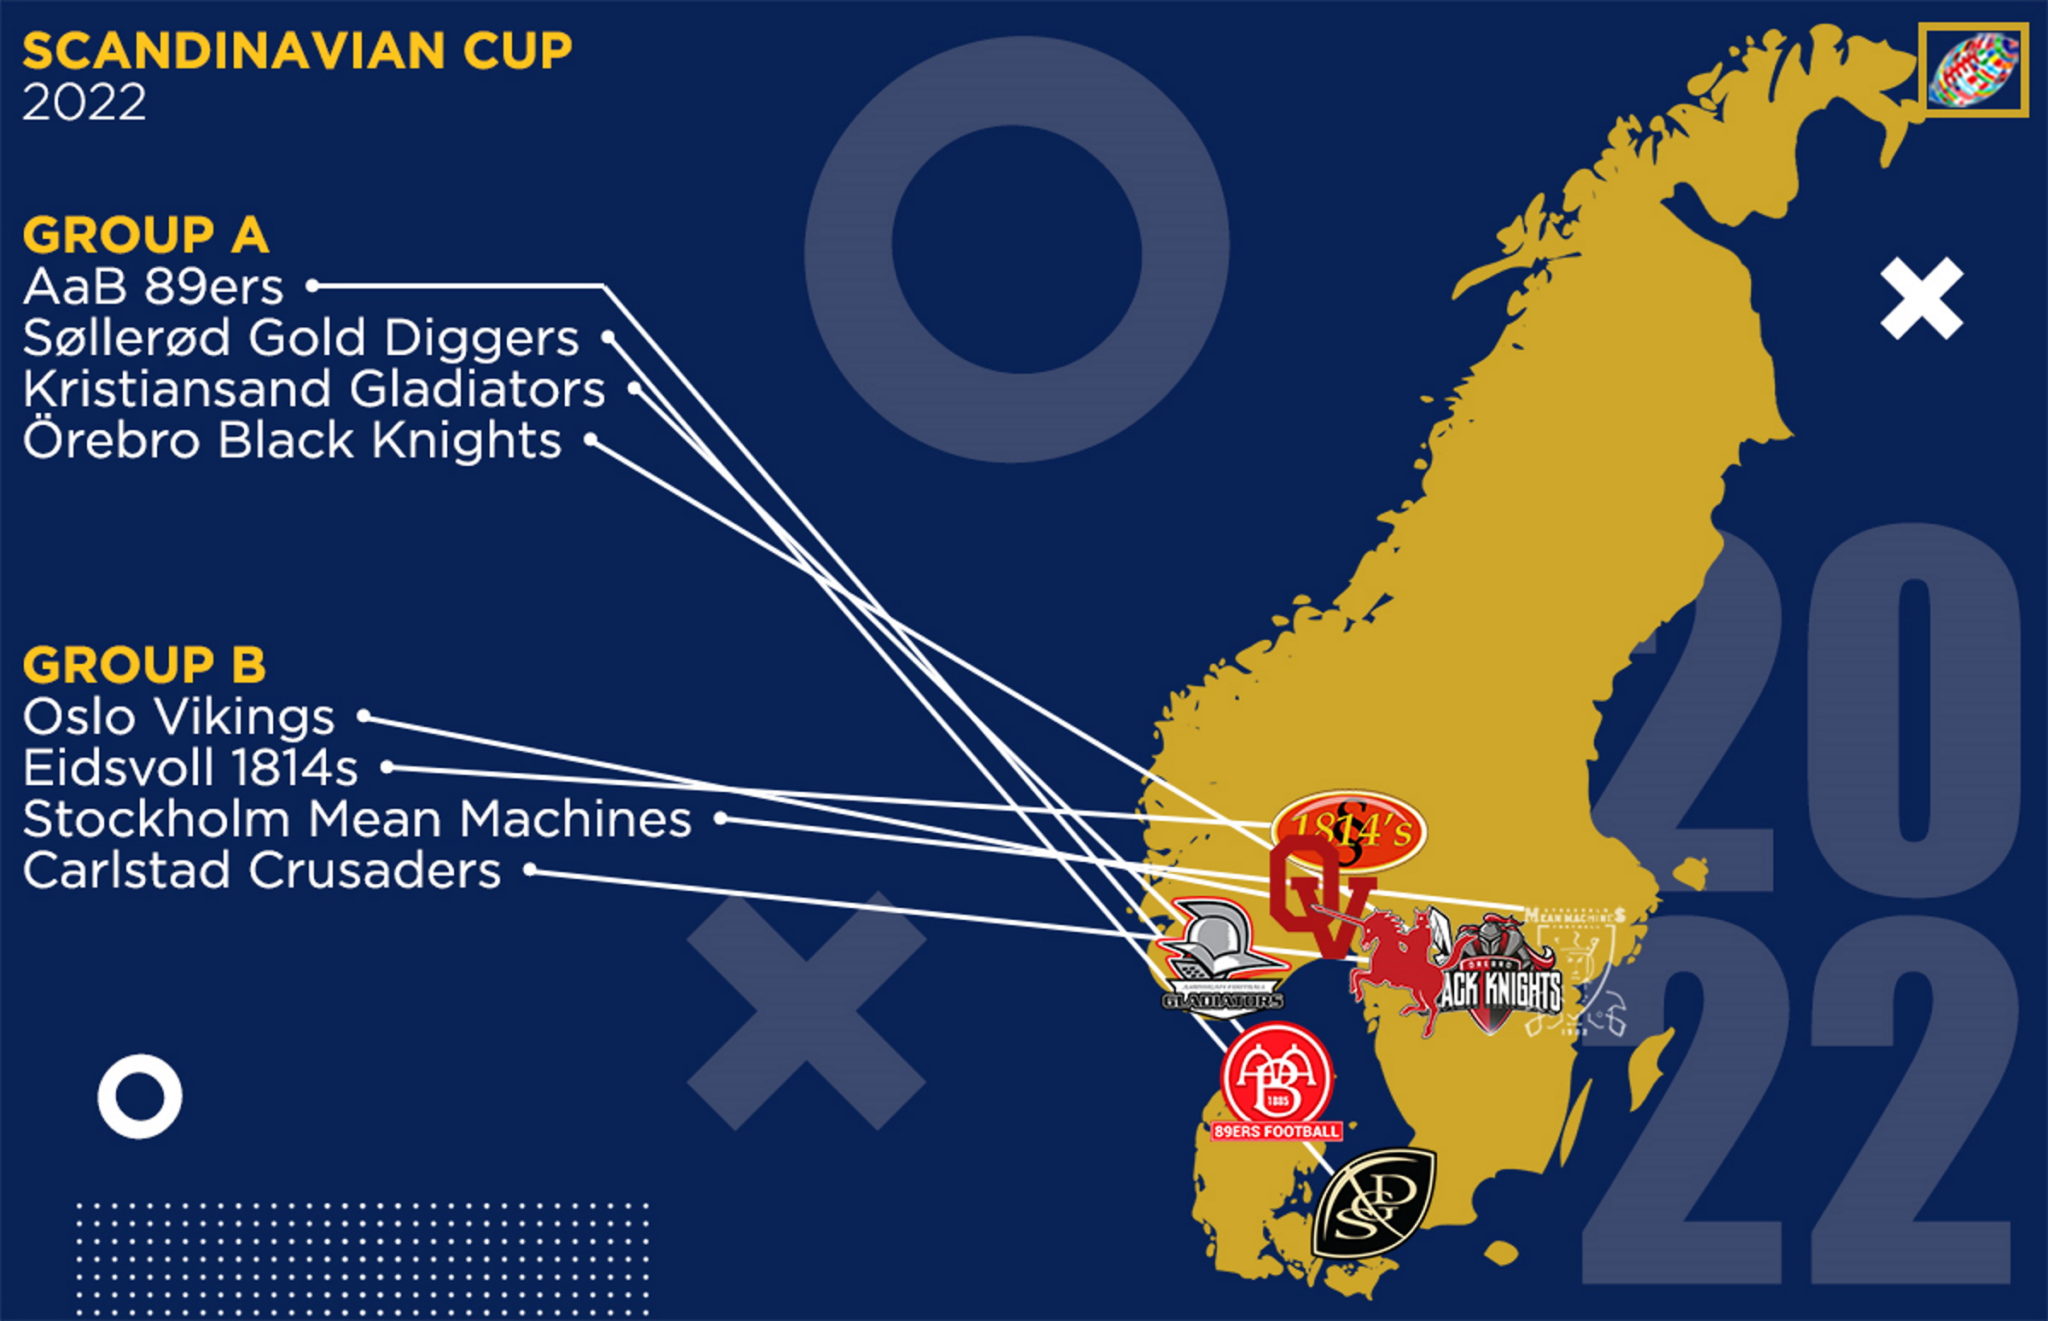 Scandinavian Cup first step towards a Nordic wide American football